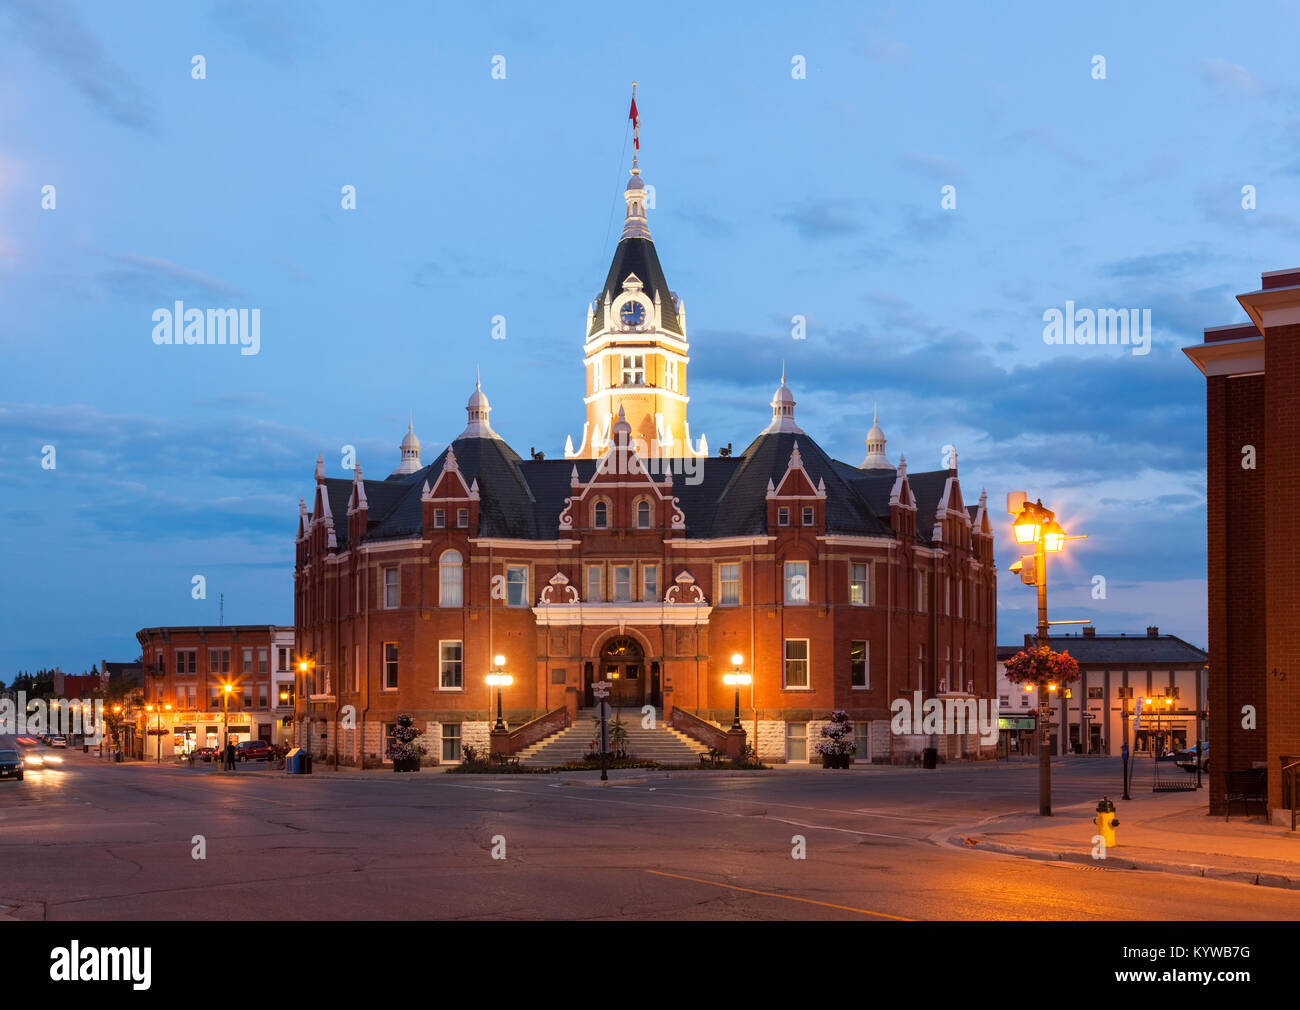 City Hall in the Queen Anne Revival style in Stratford, Ontario, Canada. Stock Photo